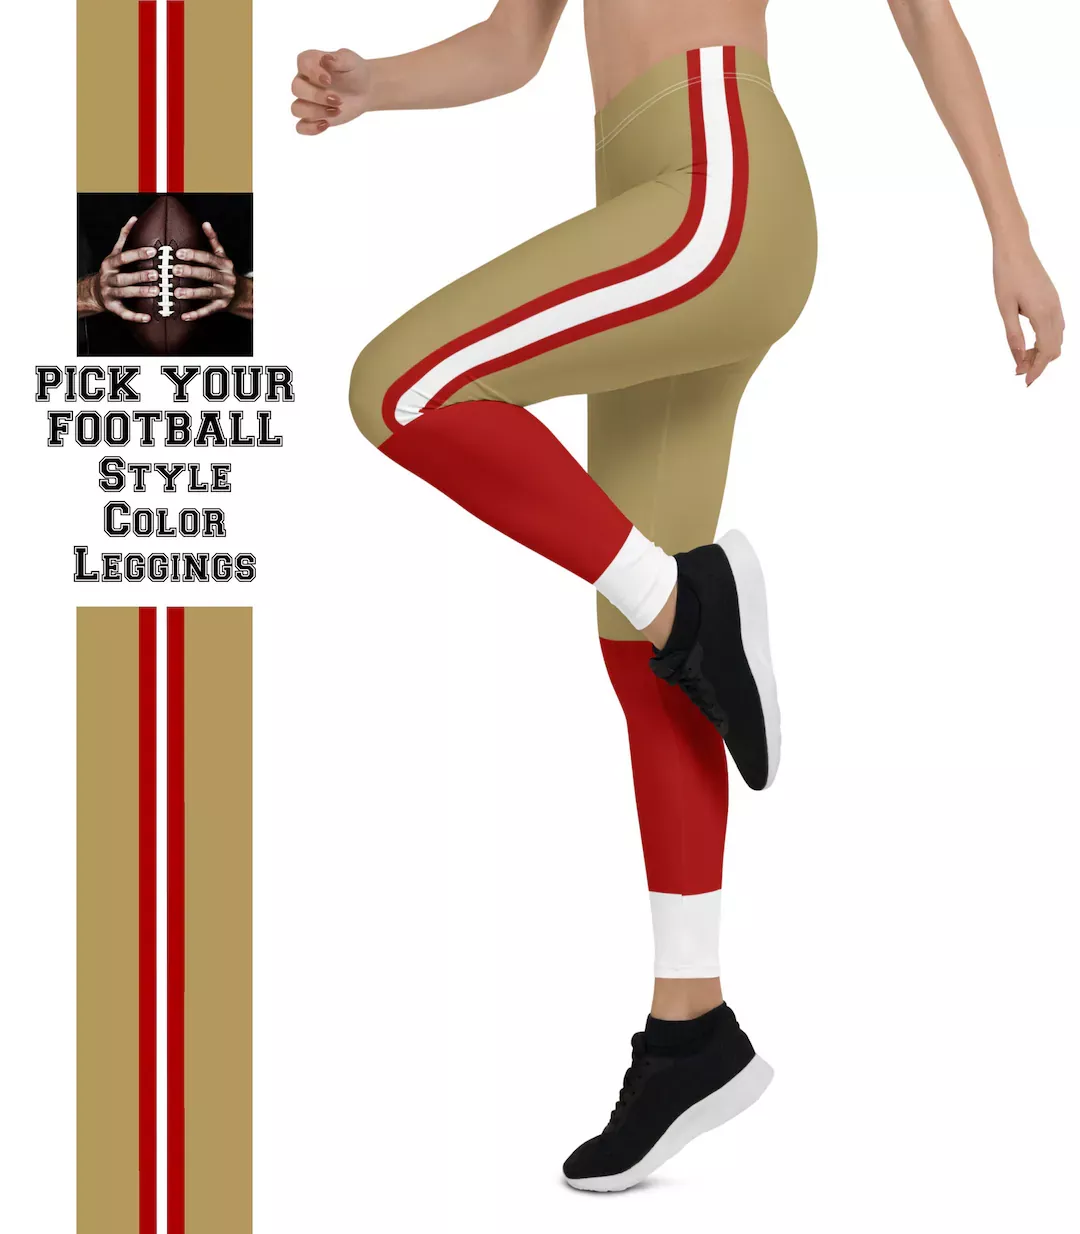 San Francisco 49ers Leggings Thematic Logo yoga running workout tights  Womens